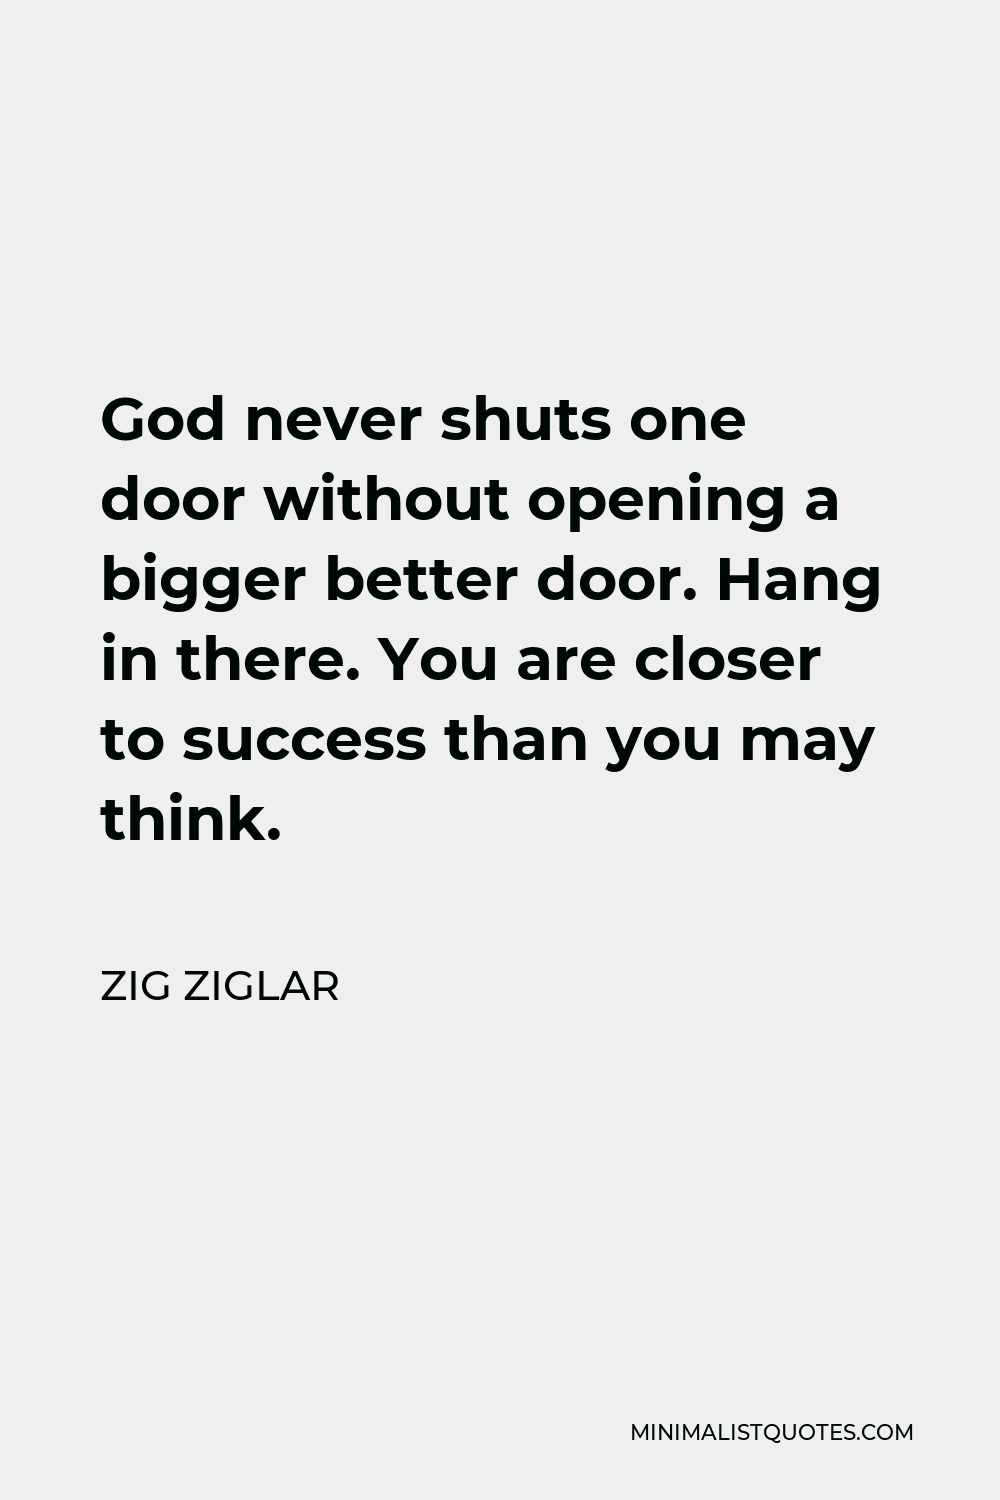 Zig Ziglar Quote - God never shuts one door without opening a bigger better door. Hang in there. You are closer to success than you may think.